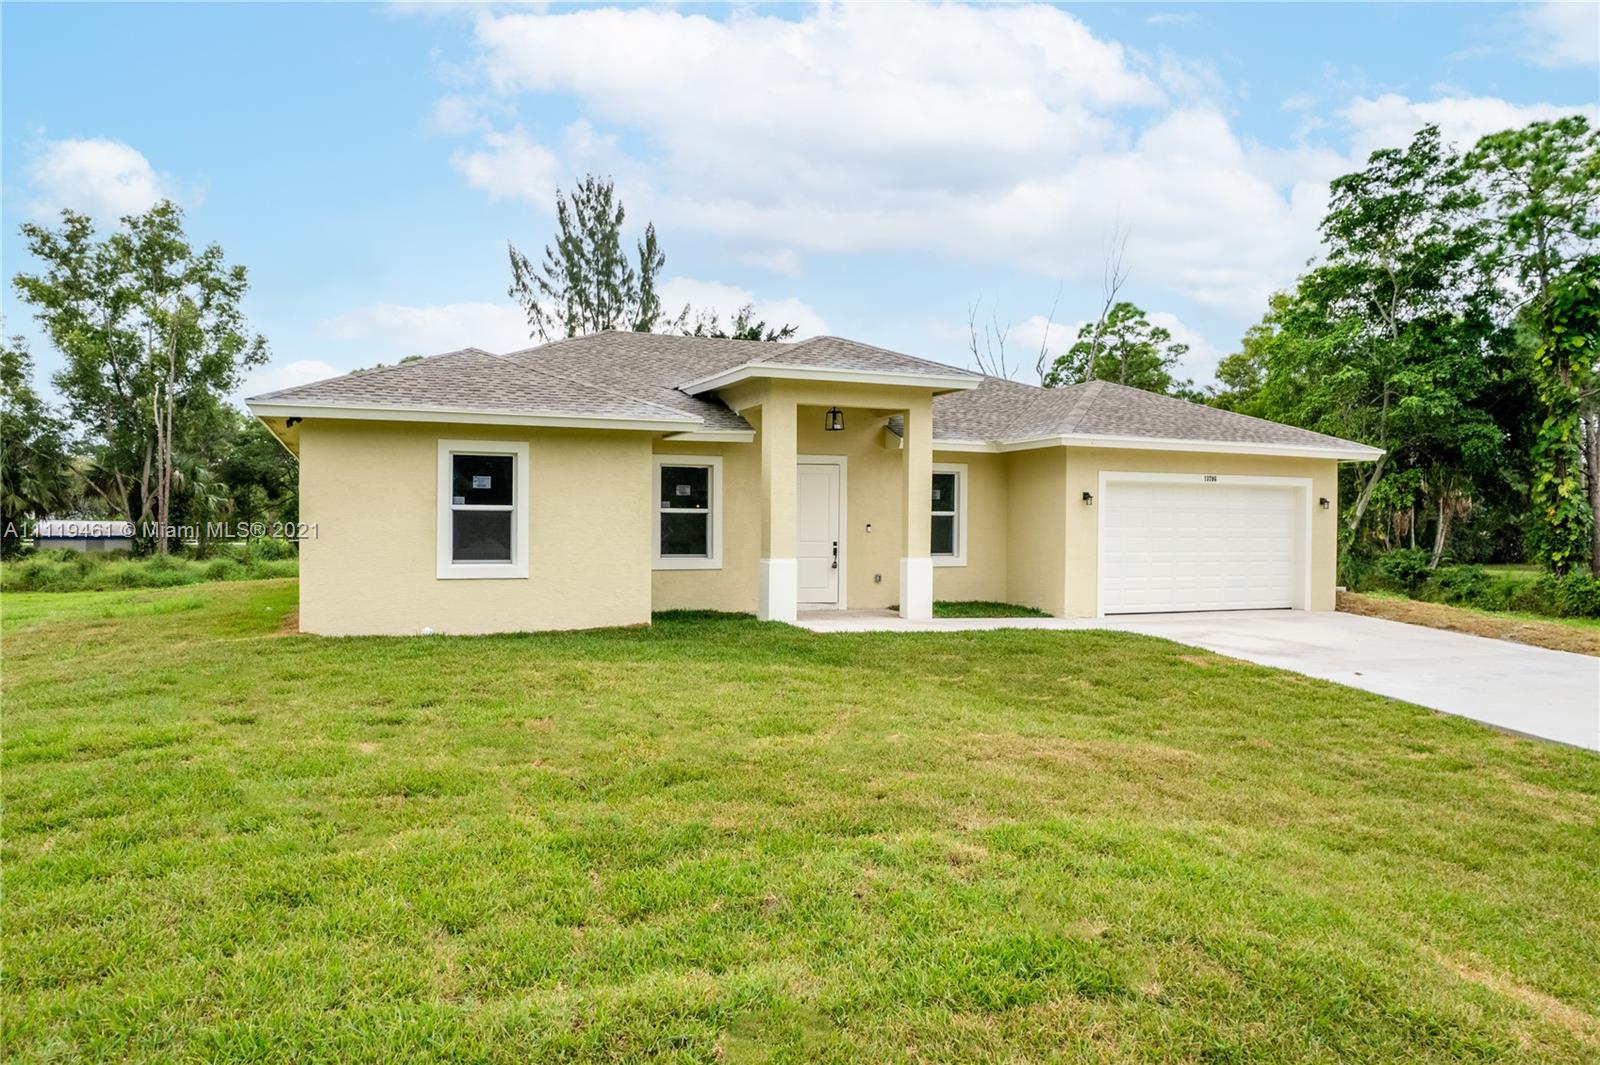 Photo 1 of 13706 57th Pl N in West Palm Beach - MLS A11119461